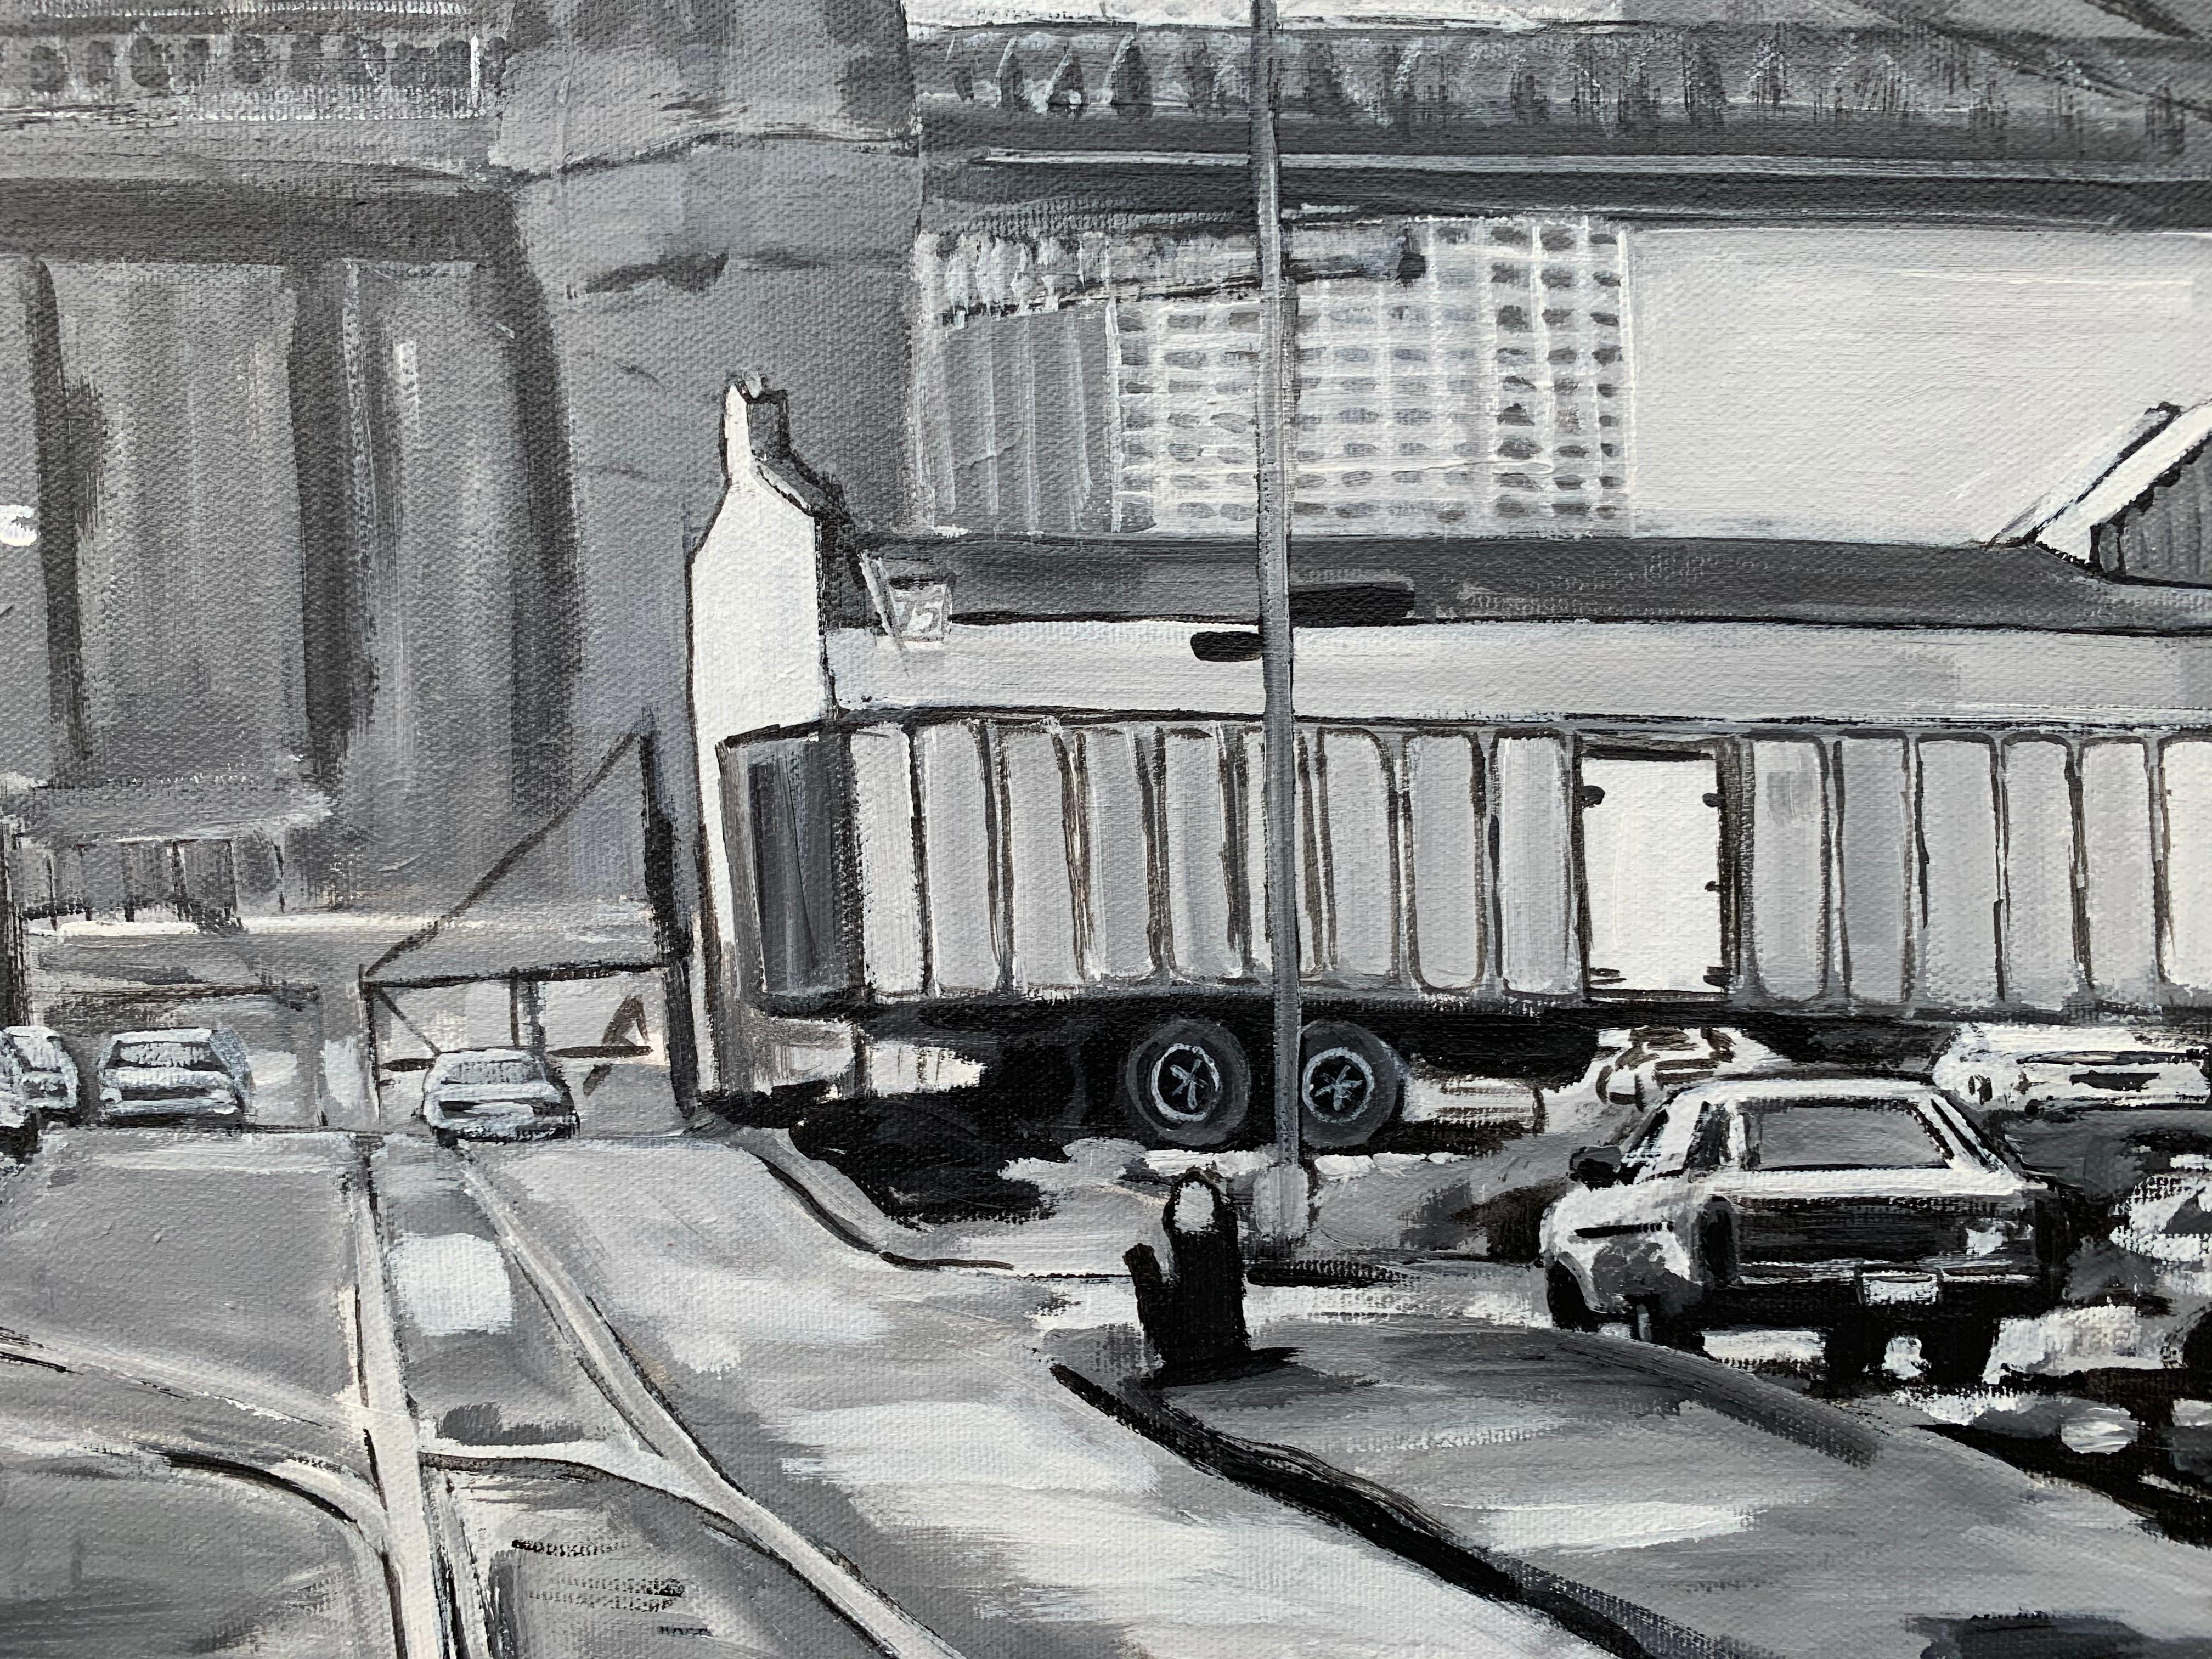 Black & White Painting of Brooklyn Bridge New York City by Leading British Urban Artist Angela Wakefield. This original is No.71 in the New York Series.

Art measures 24 x 18 inches
Frame measures 29 x 23 inches

Angela Wakefield has twice been on